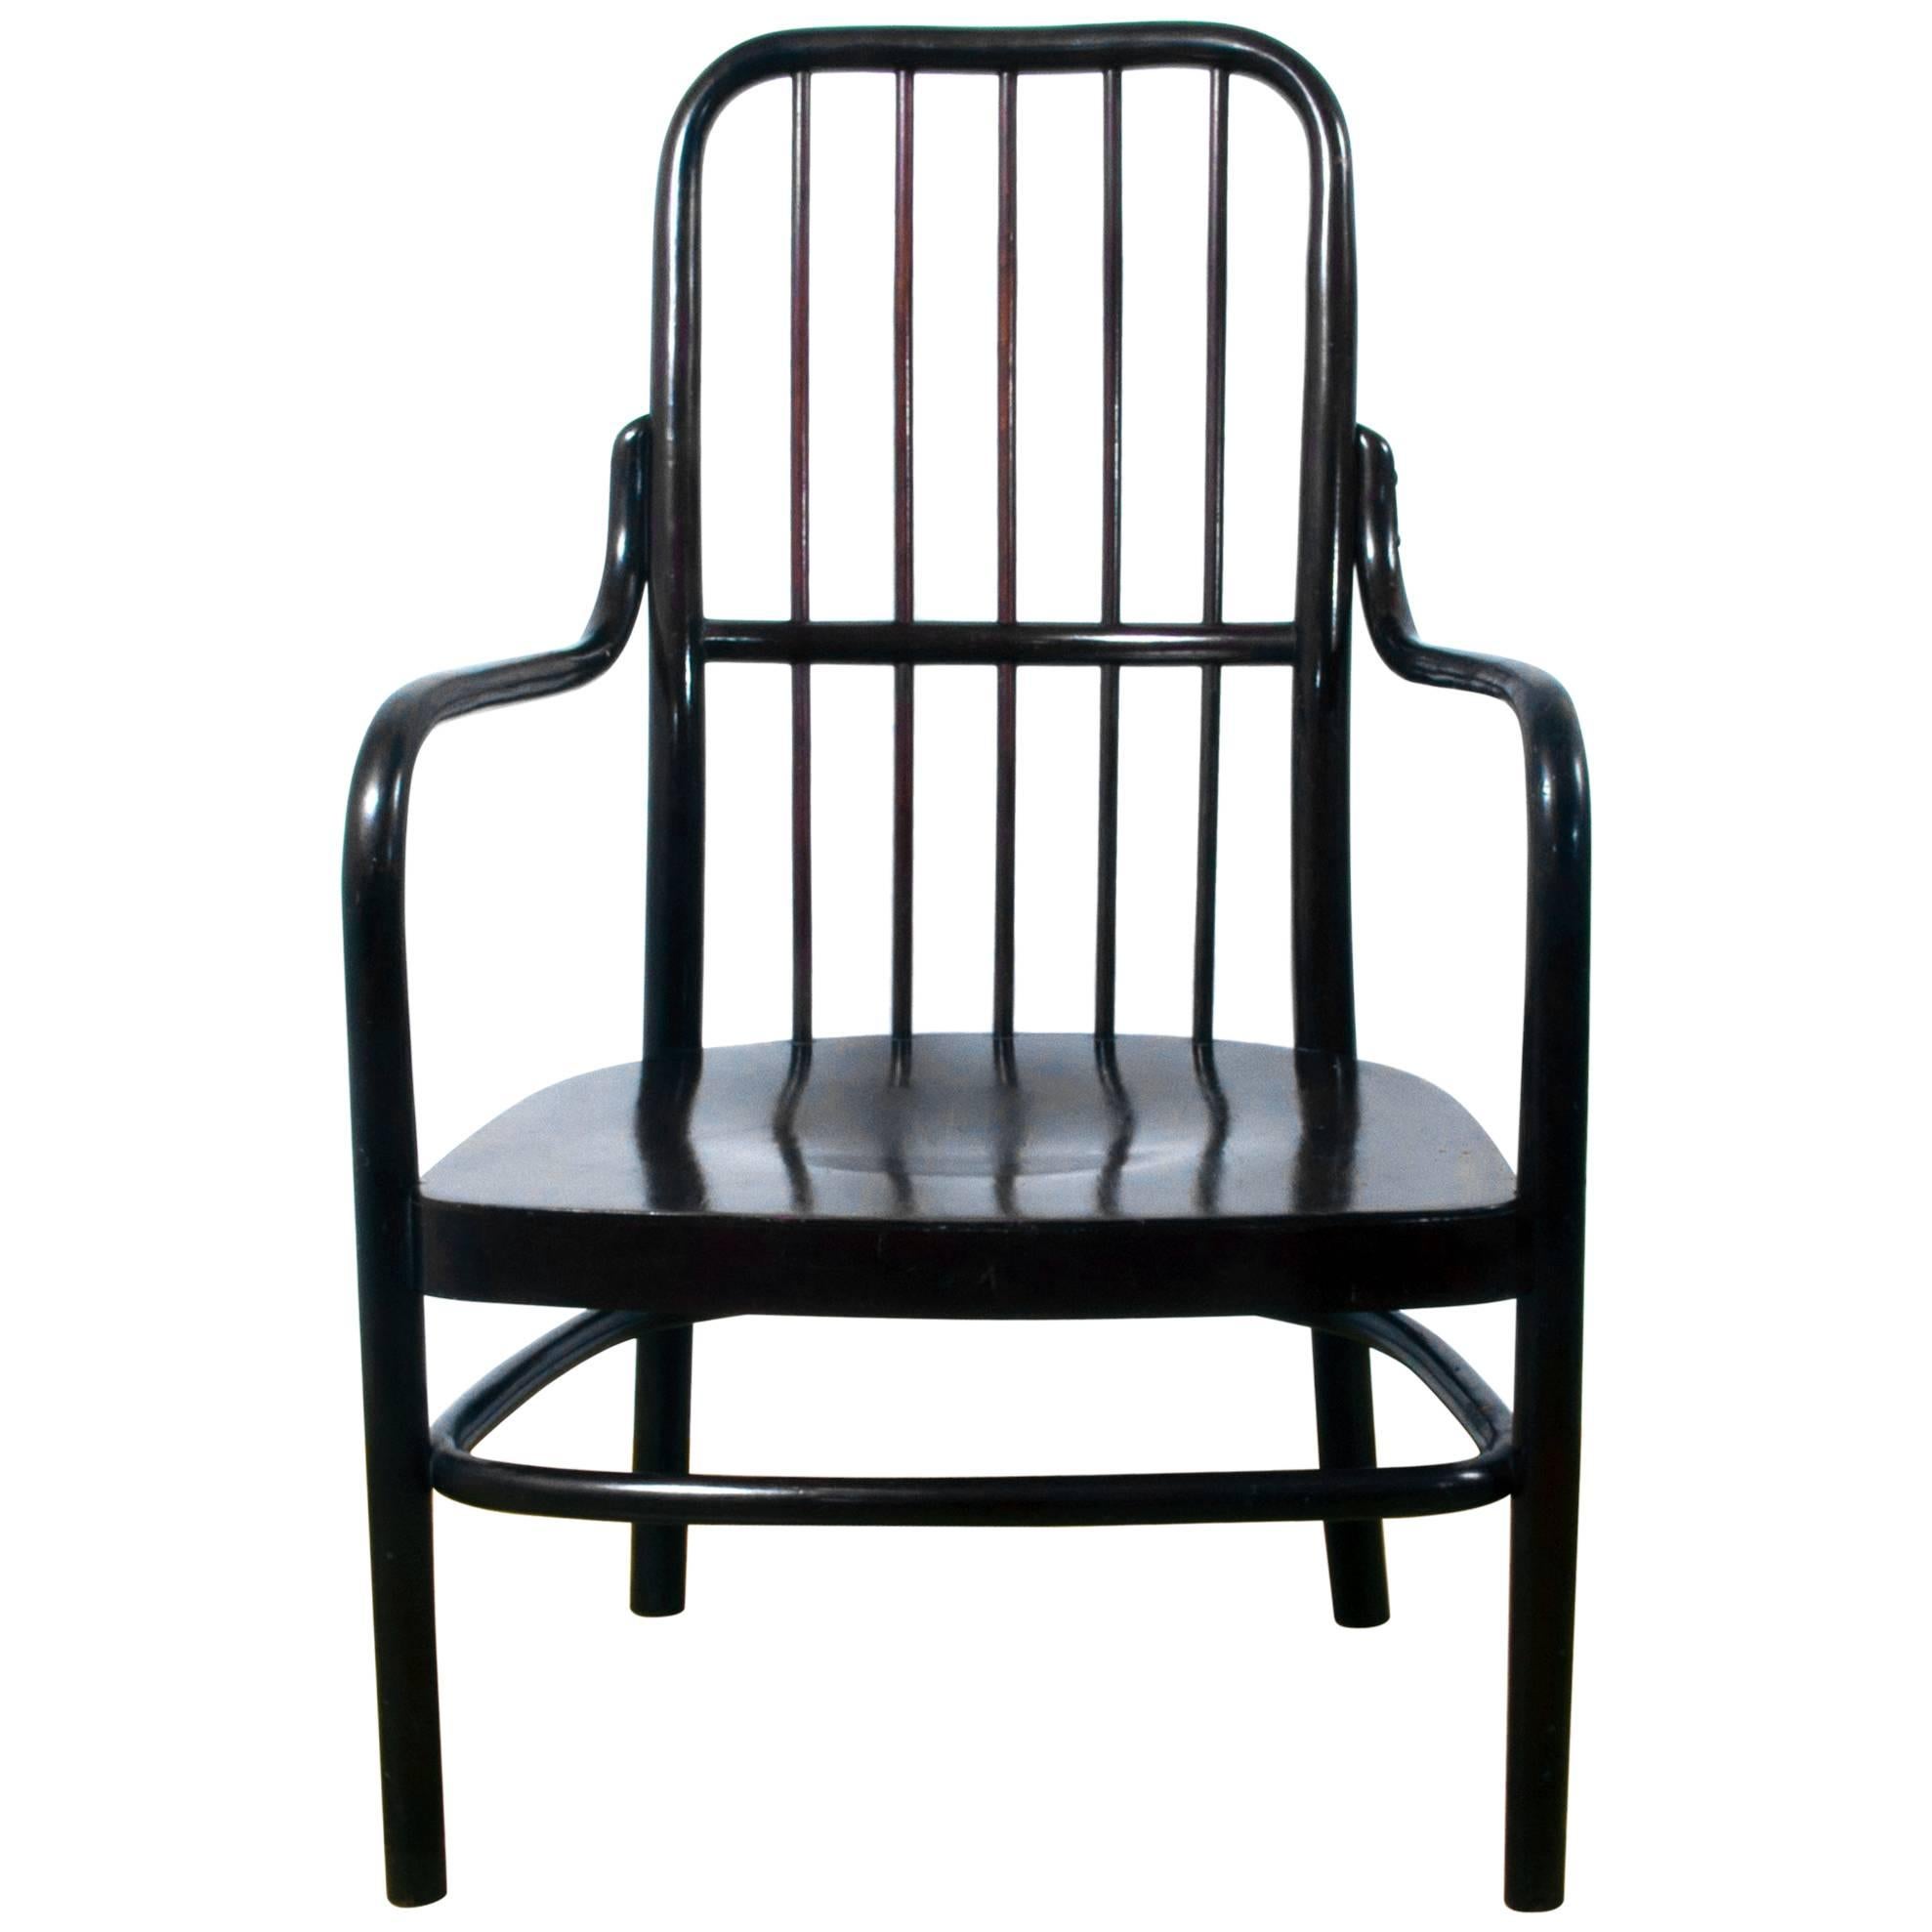 Thonet No. A63/F by Josef Frank Bentwood Lounge or Low Armchair Art Deco For Sale